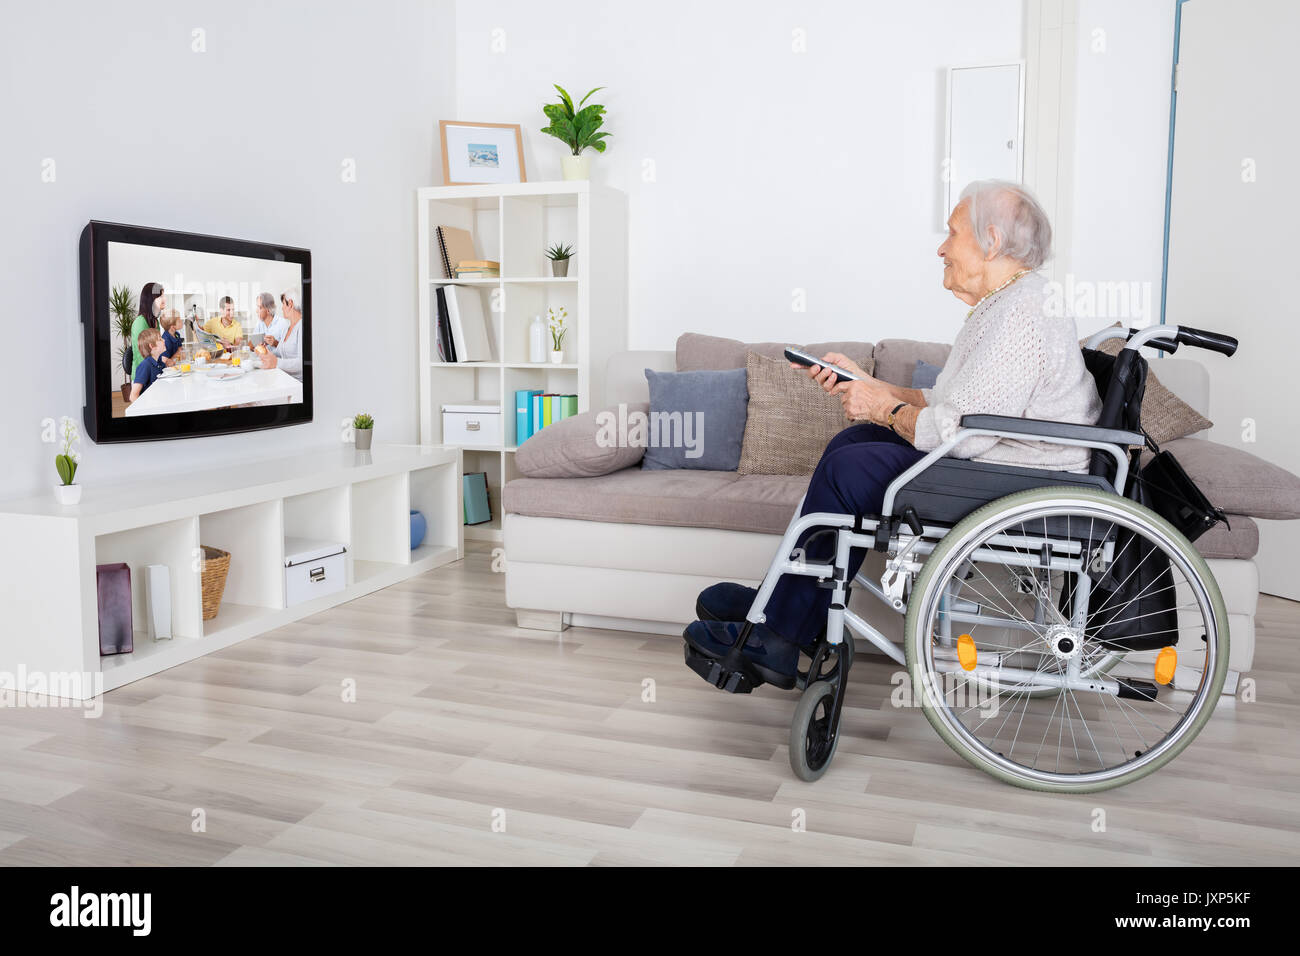 Grandmother On Wheelchair Watching Movie On Television At Home Stock Photo